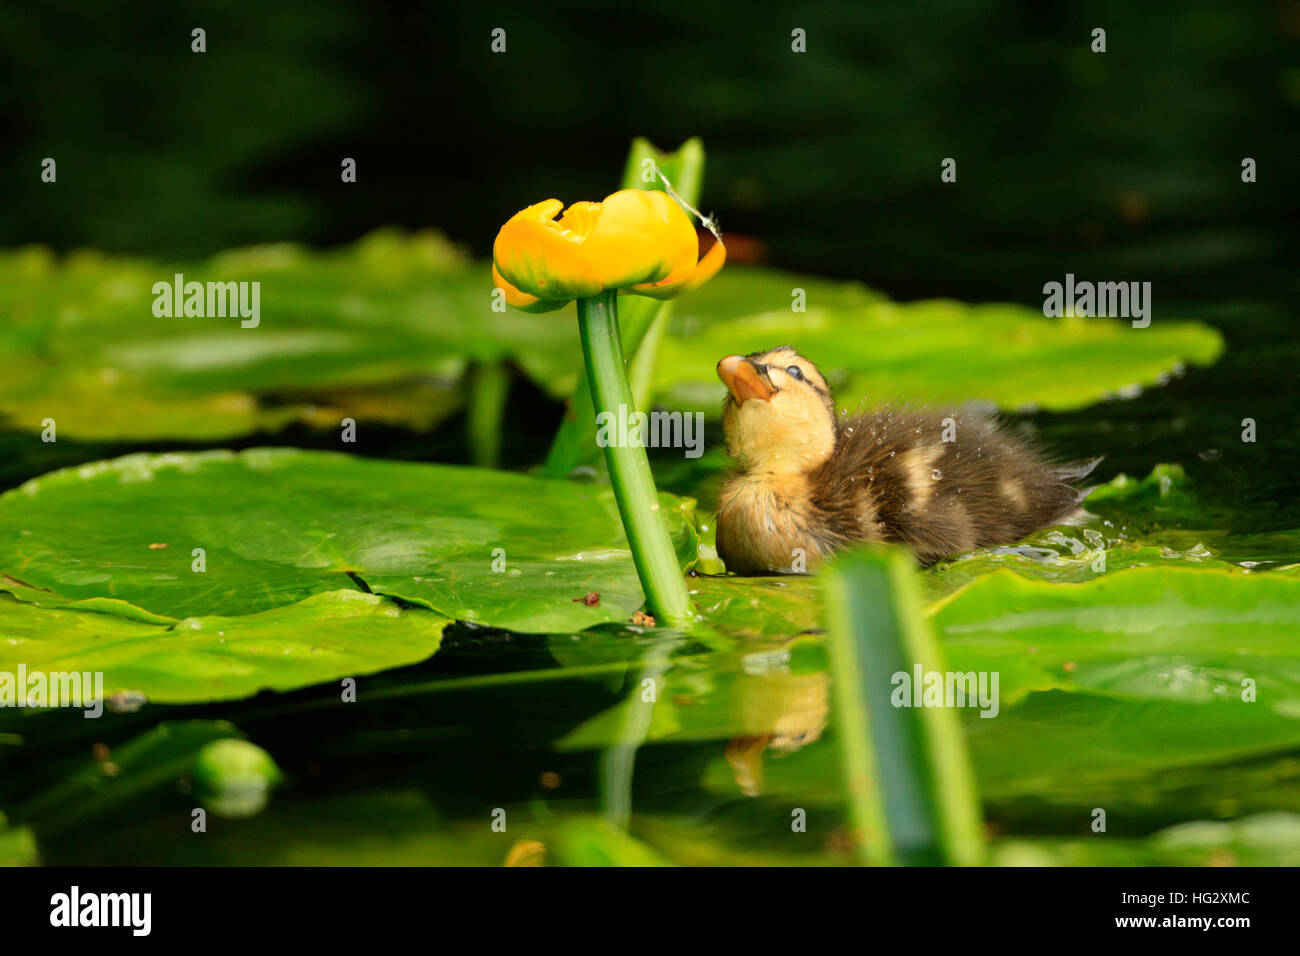 Very young fluffy and curious duckling exploring its pond environment. Good calendar image. Stock Photo